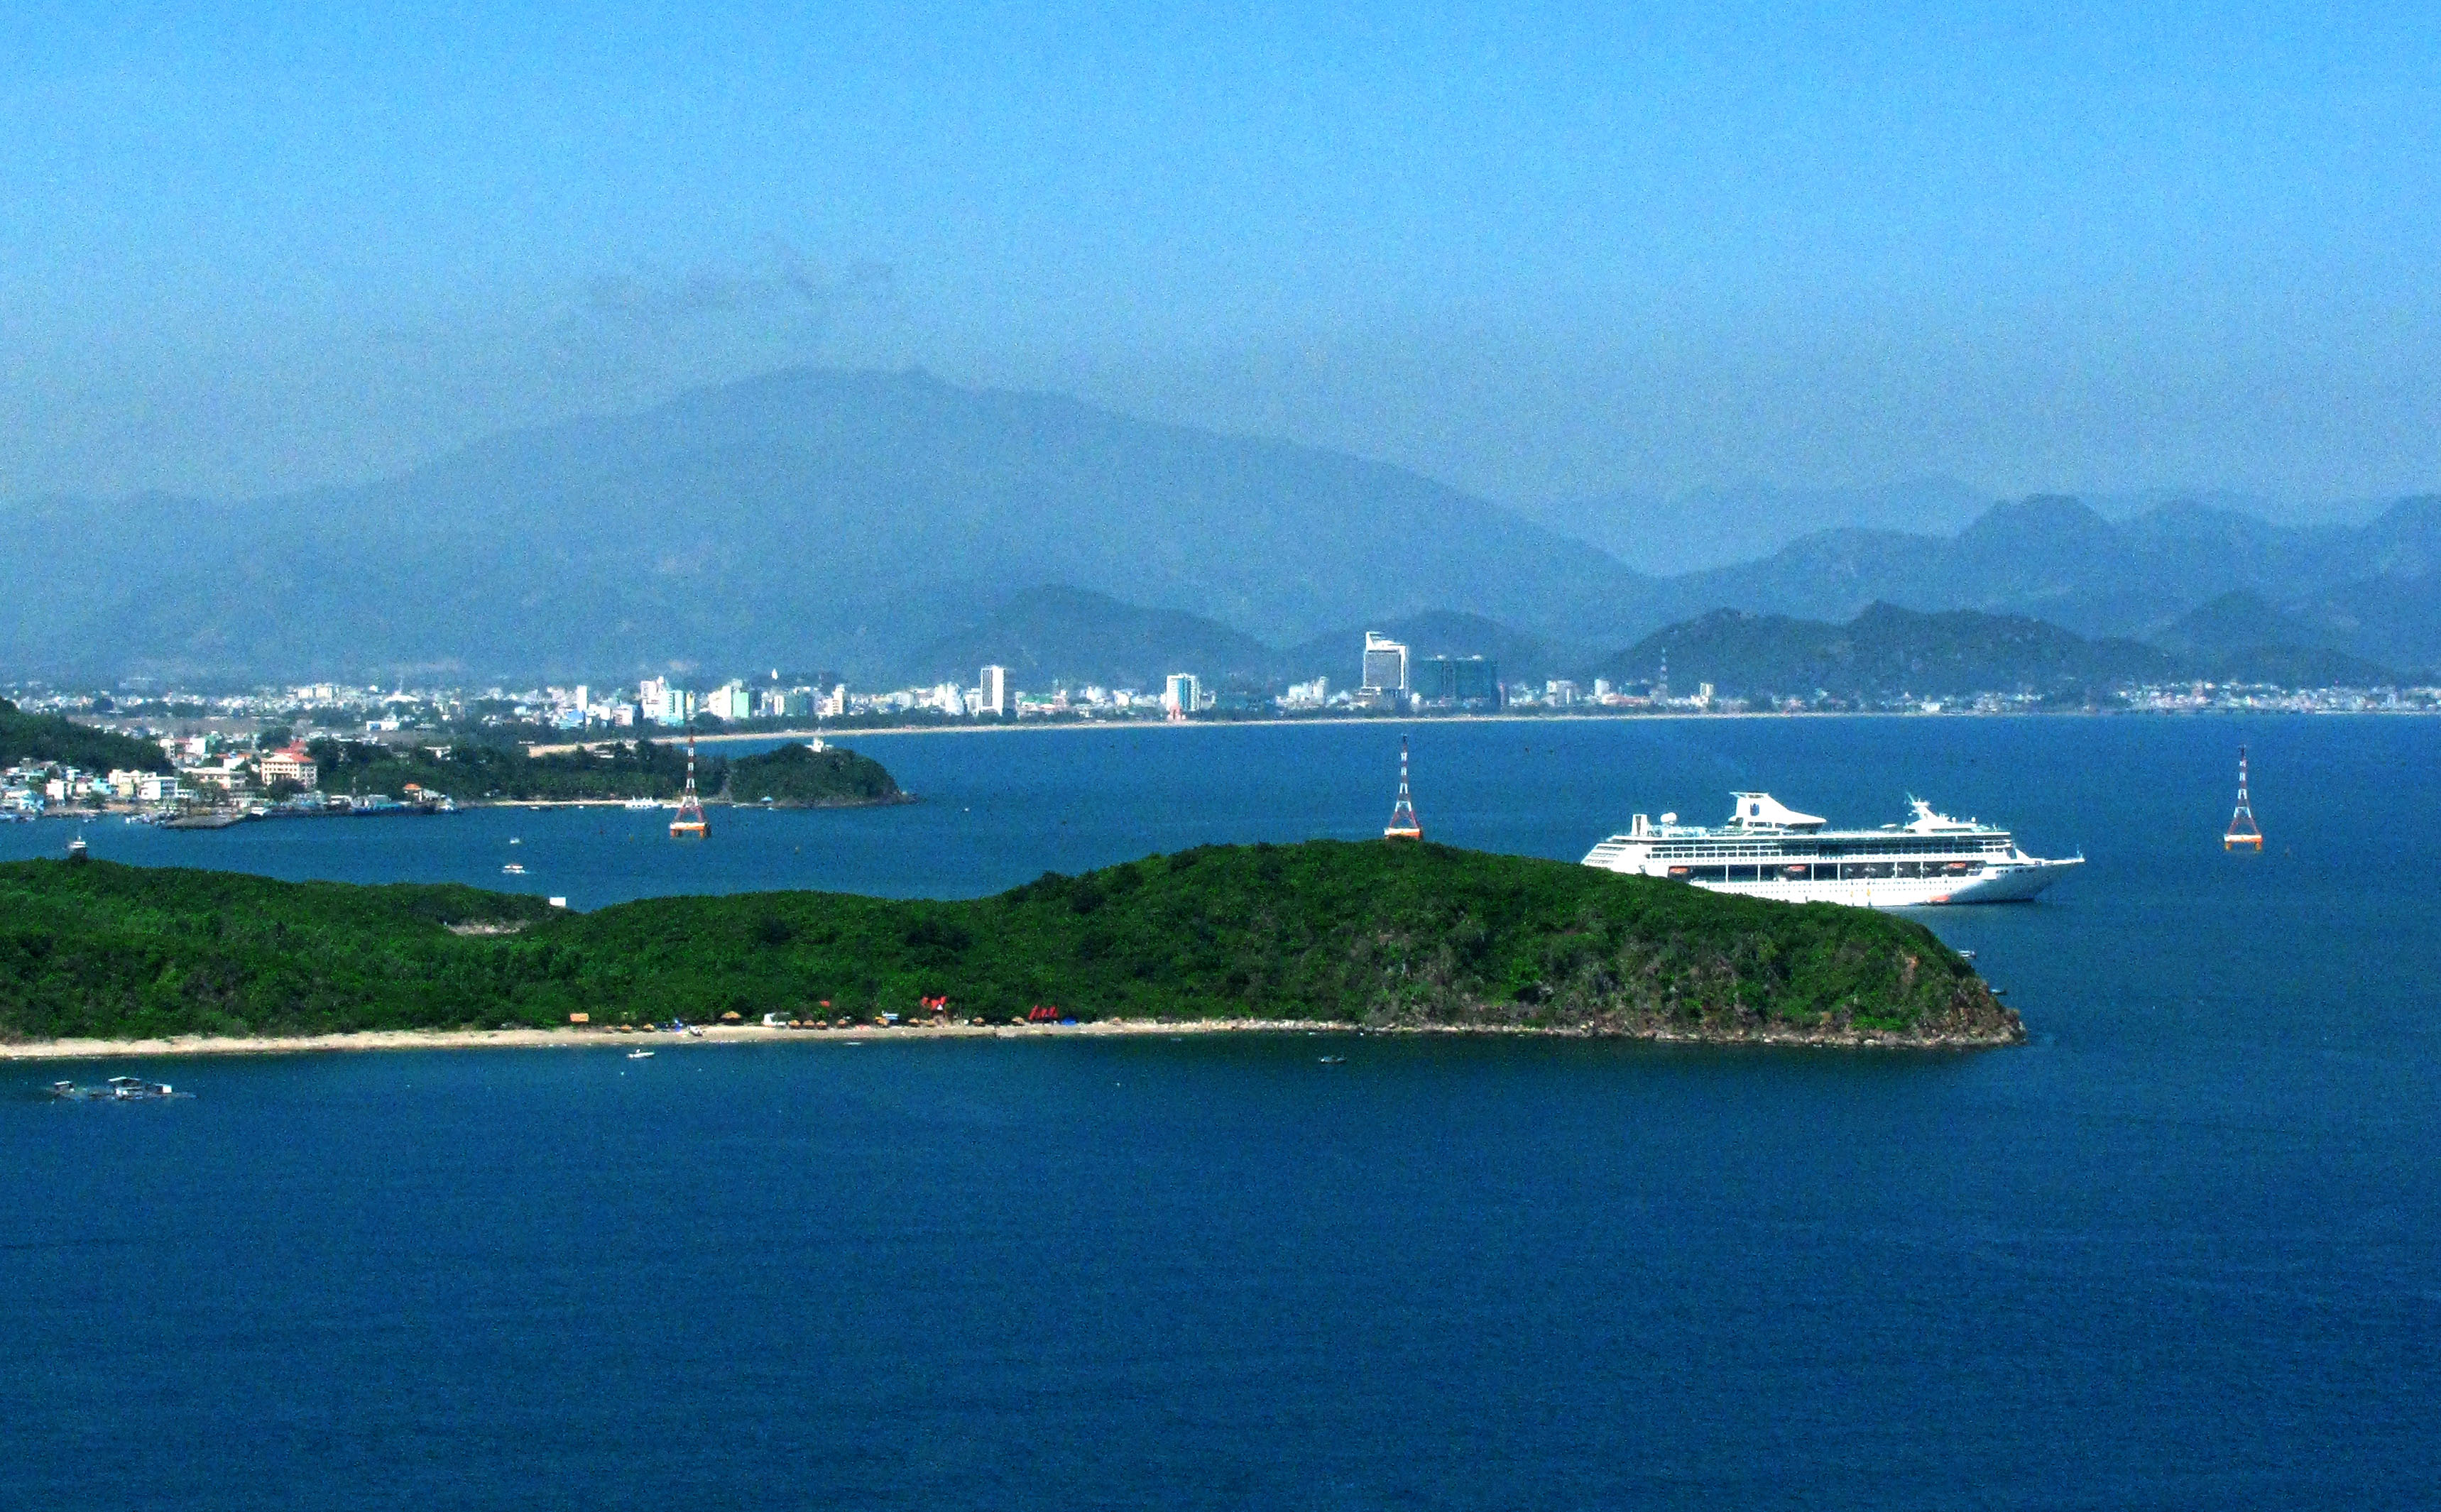 Nha Trang Bay, one of the world’s most spectacular bays, was recognized as national sight in 2005.